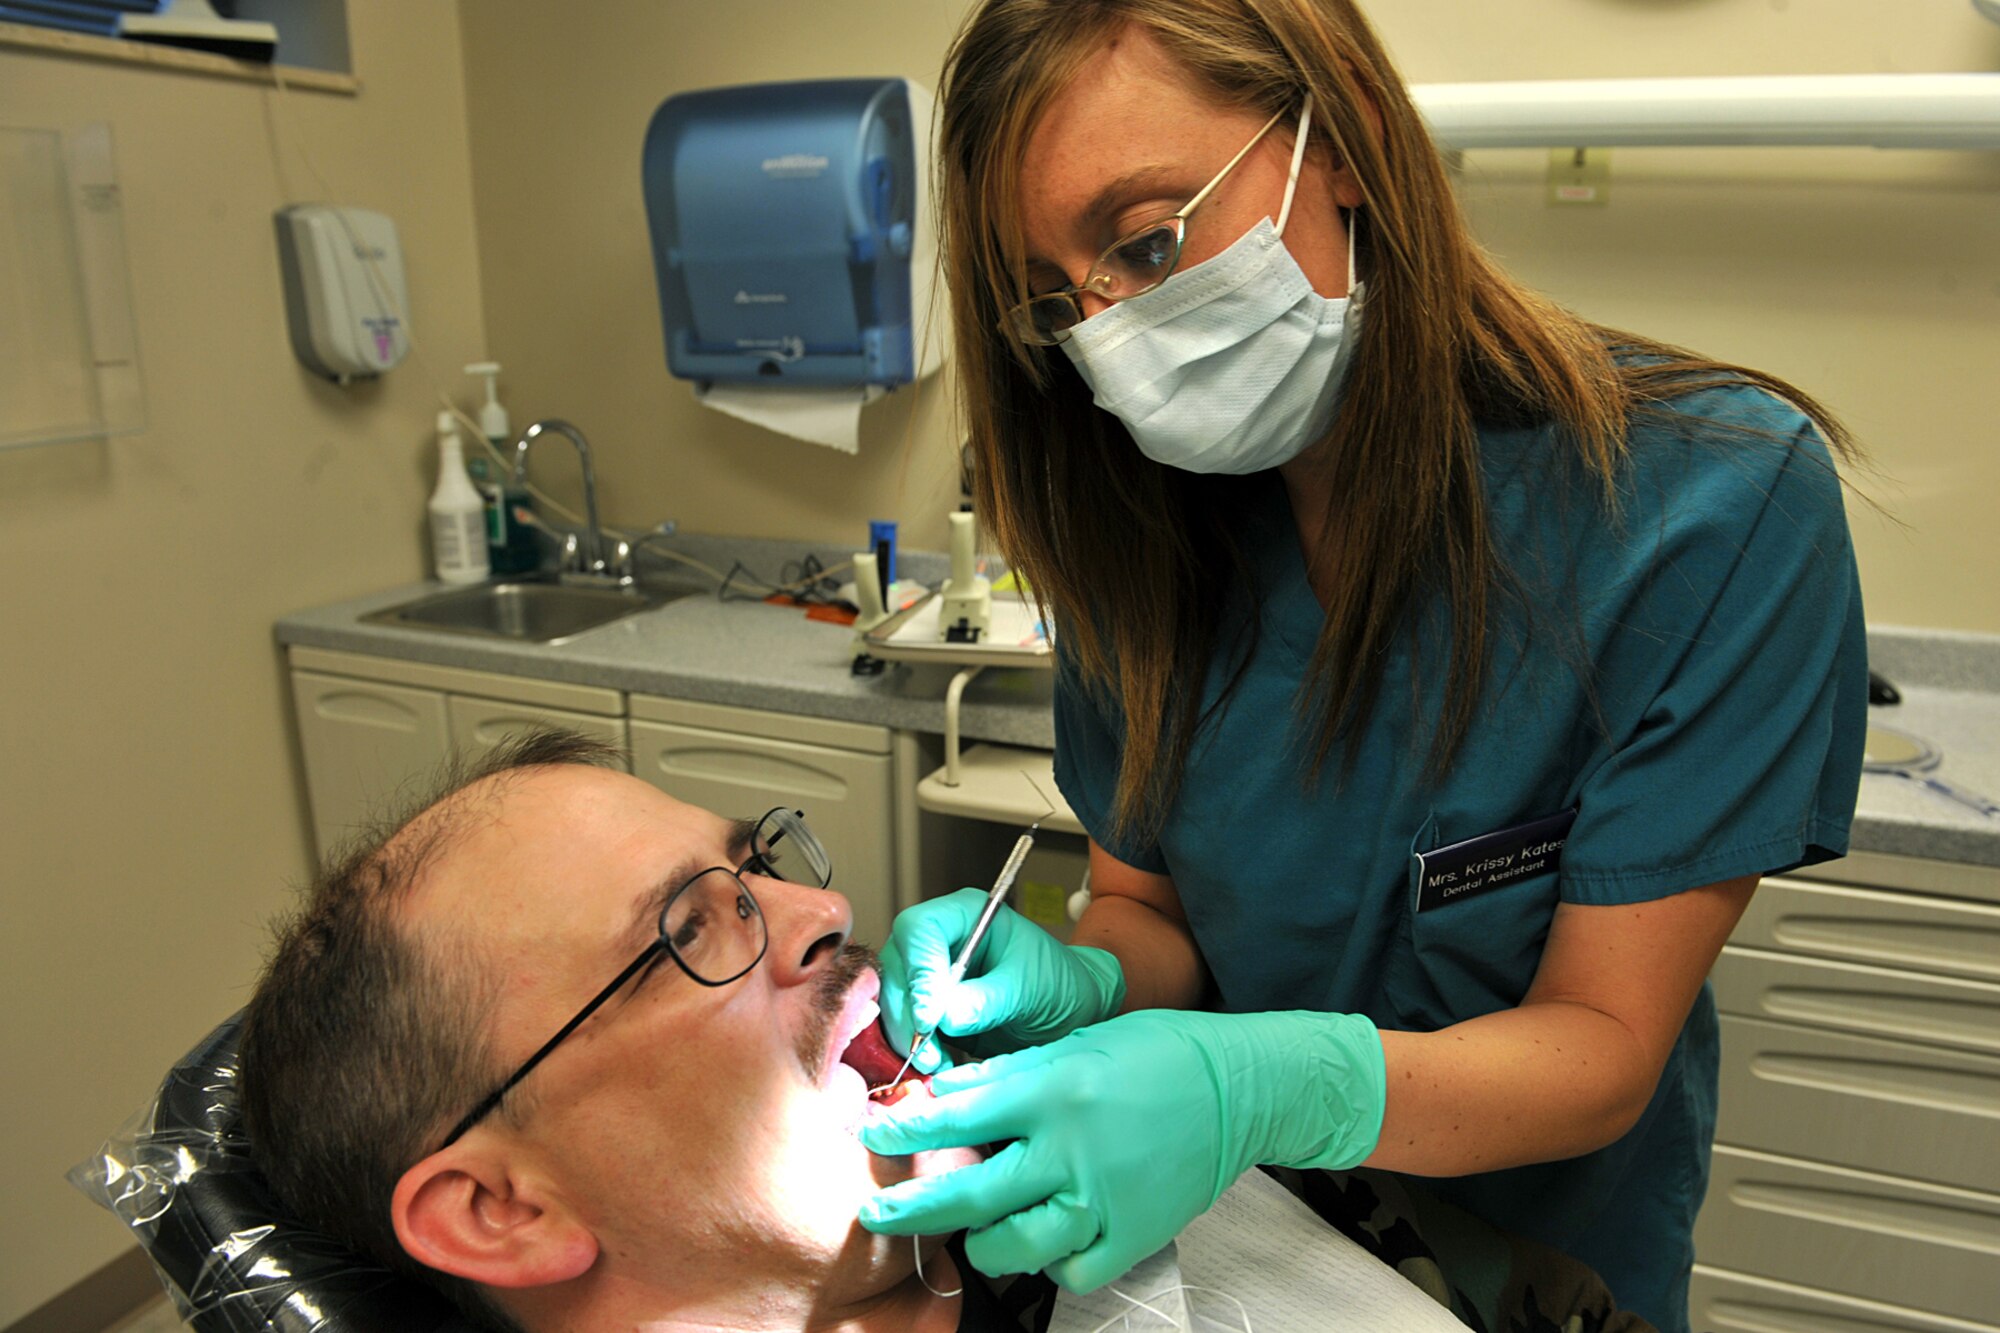 OFFUTT AIR FORCE BASE Neb,. -- Krissy Kates, dental assistant with the 55th Dental Squadron, examines the teeth of Tech. Sgt. Dennis Heck, 55th Communications Group, inside the dental facility at the Ehrling Bergquist Clinic here April 26. The 55th Medical Group scored an outstanding rating on their recent Health Services Inspection becoming the first unit in the continental United States to do so this year. U.S. Air Force Photo by Charles Haymond